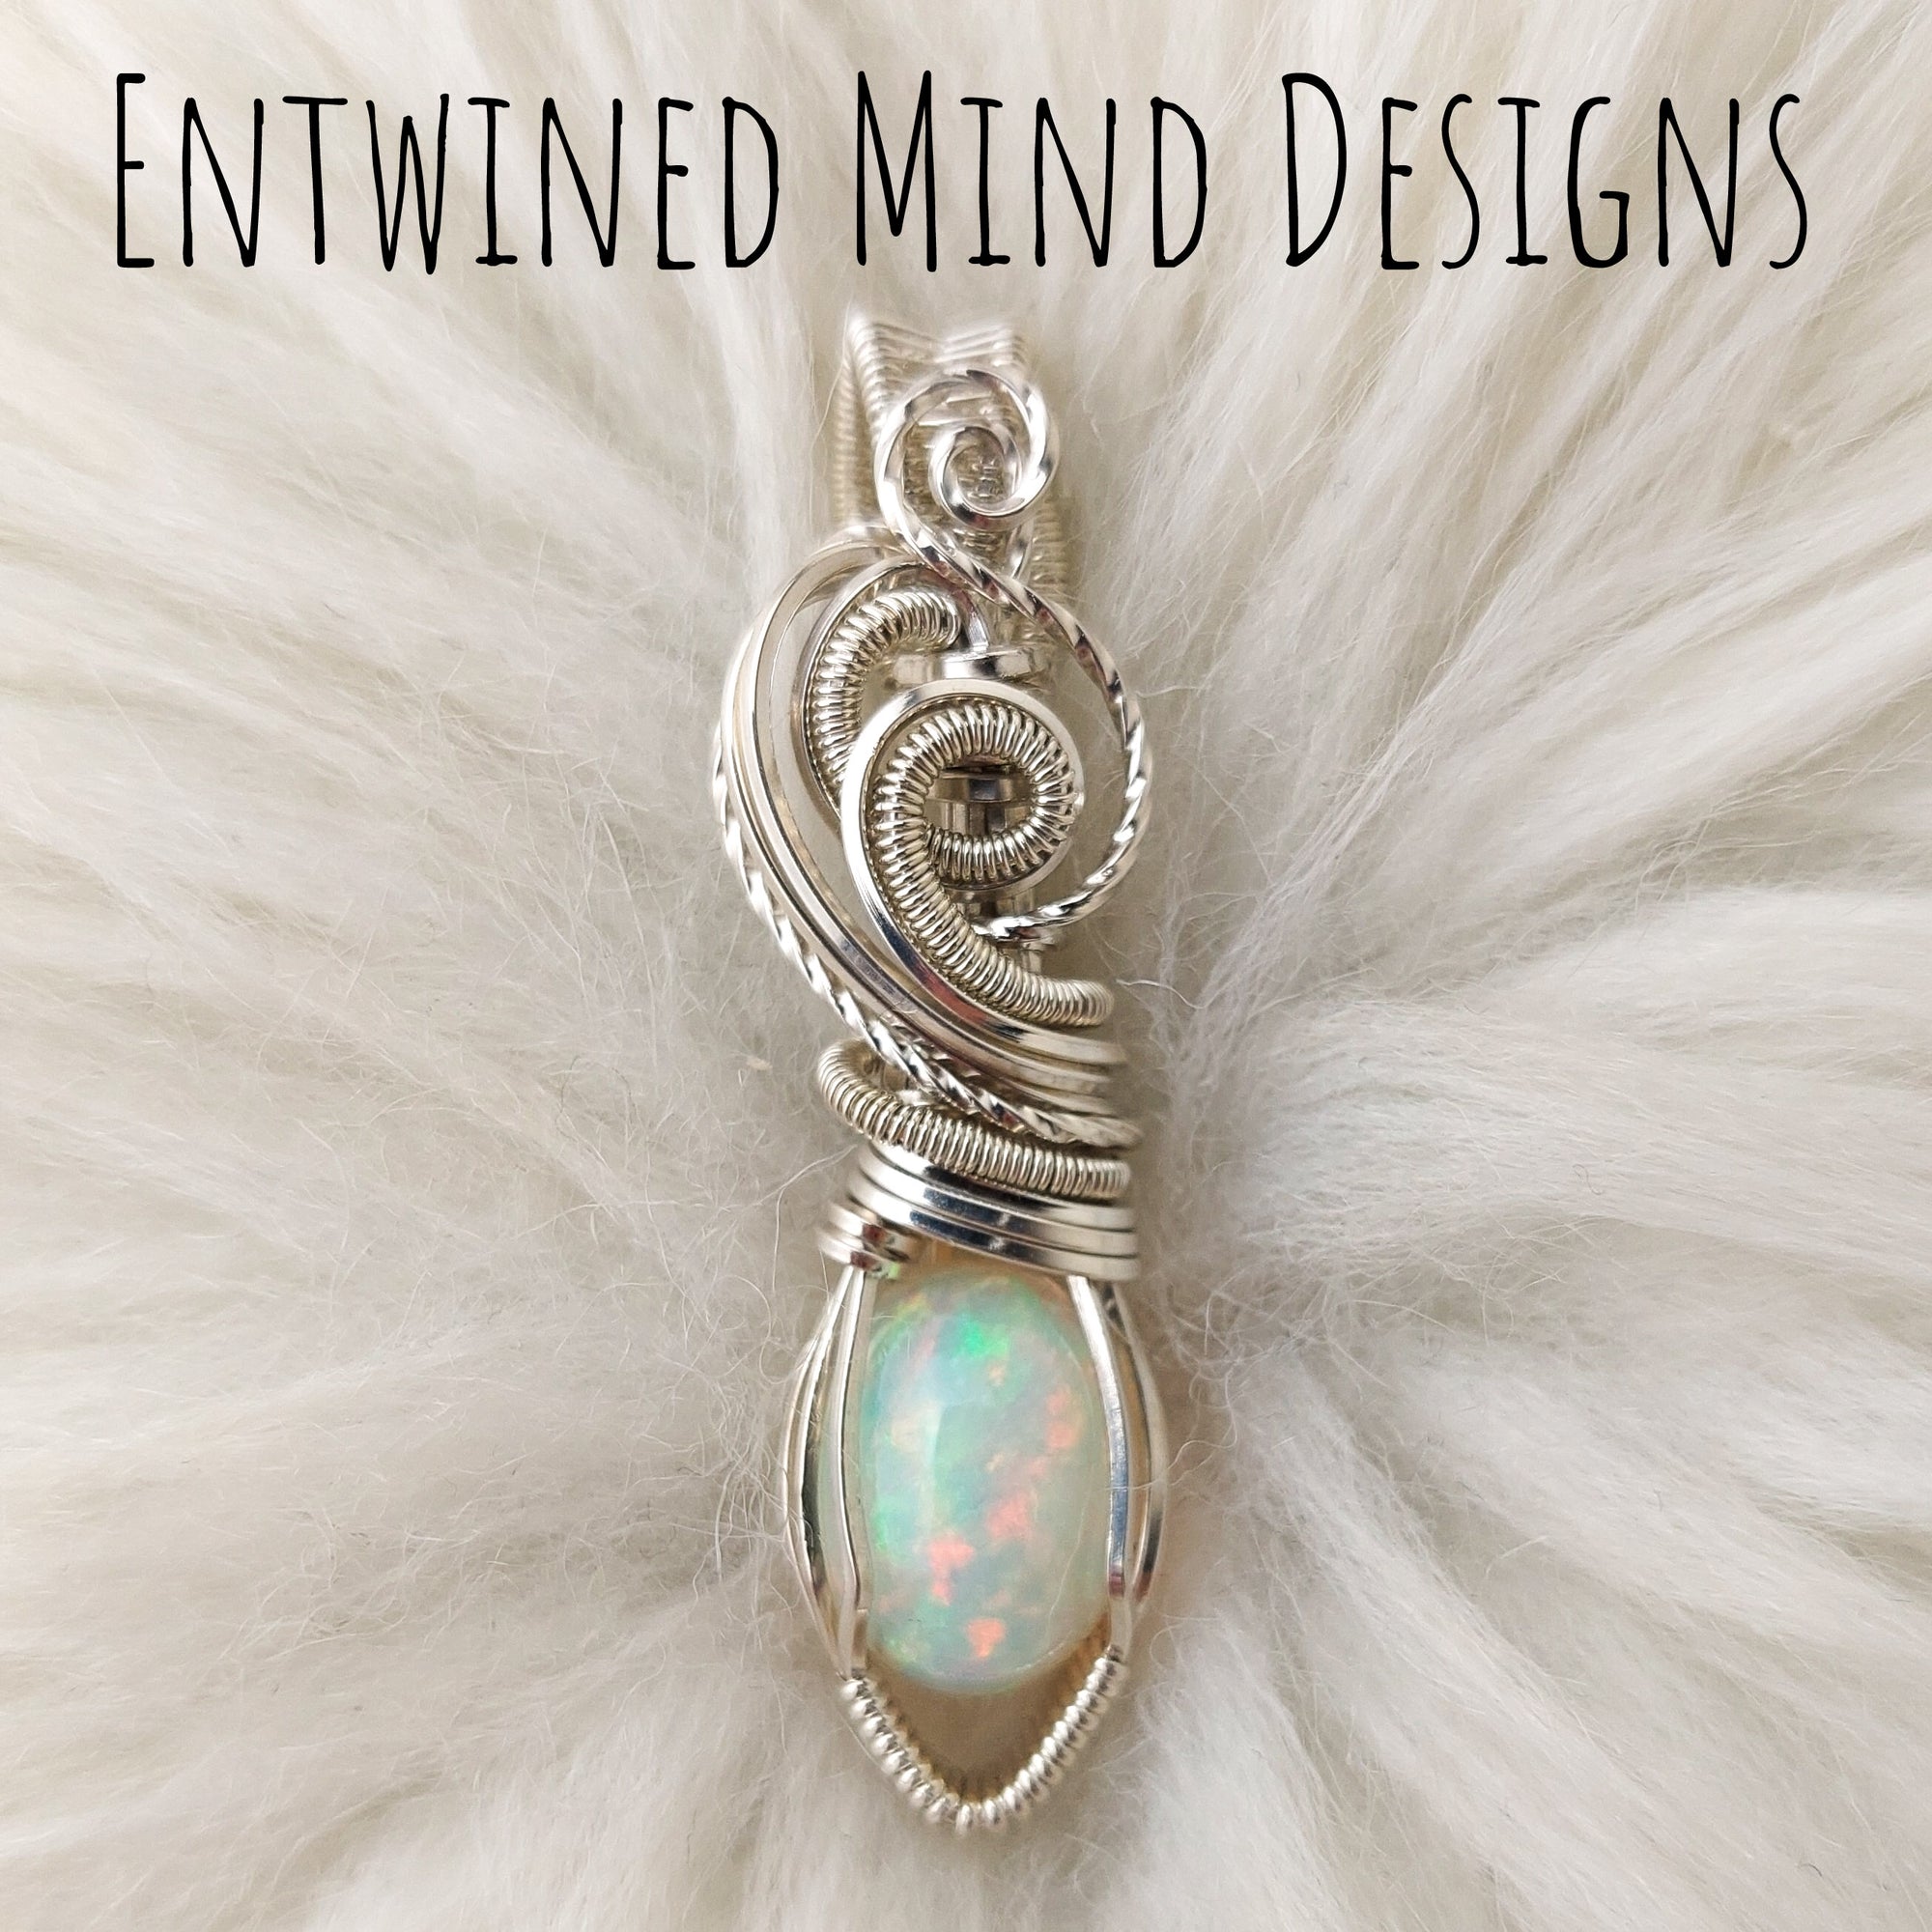 6ct Ethiopian Opal and Sterling Silver Pendant